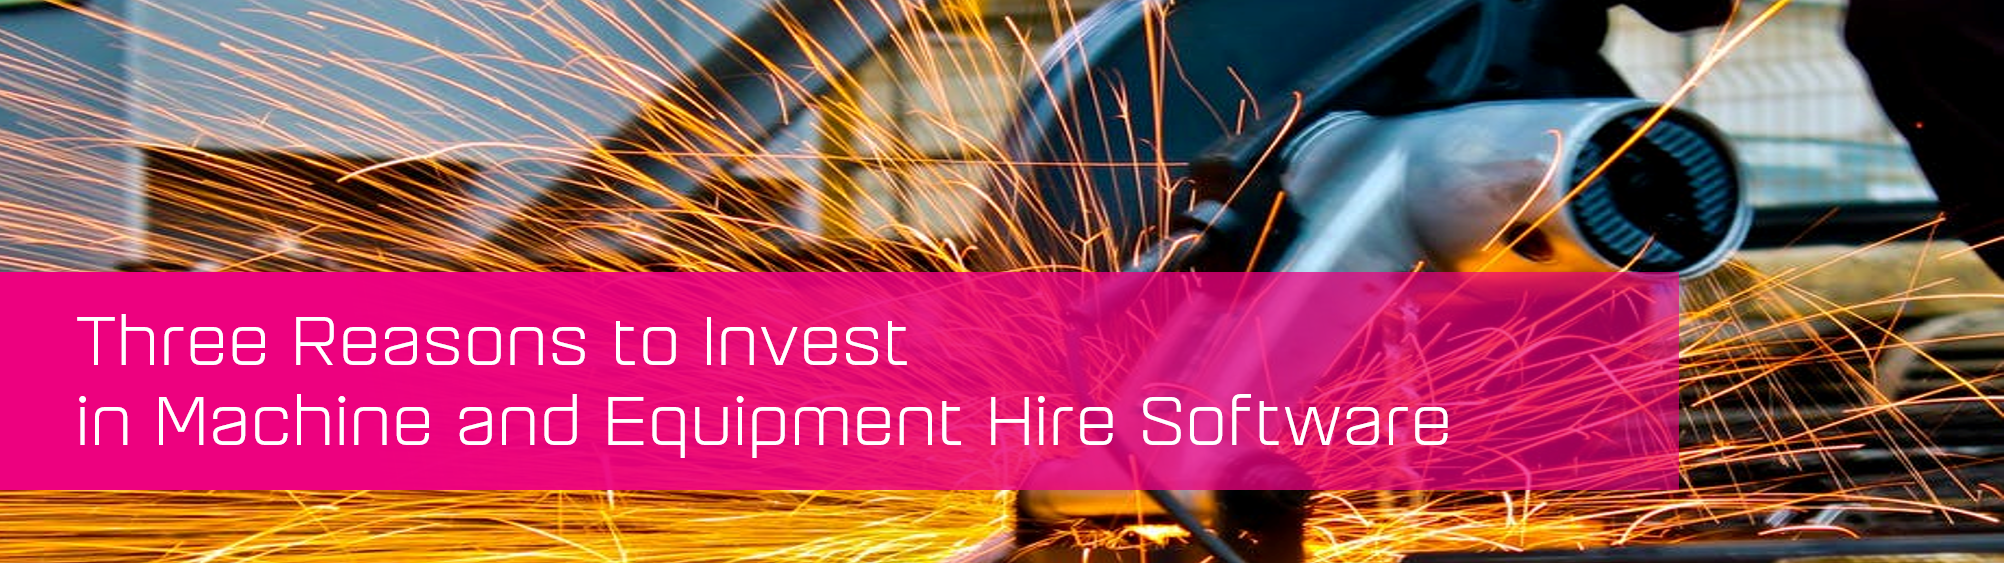 KCS SA - Blog - 3 reasons to invest in hire software banner